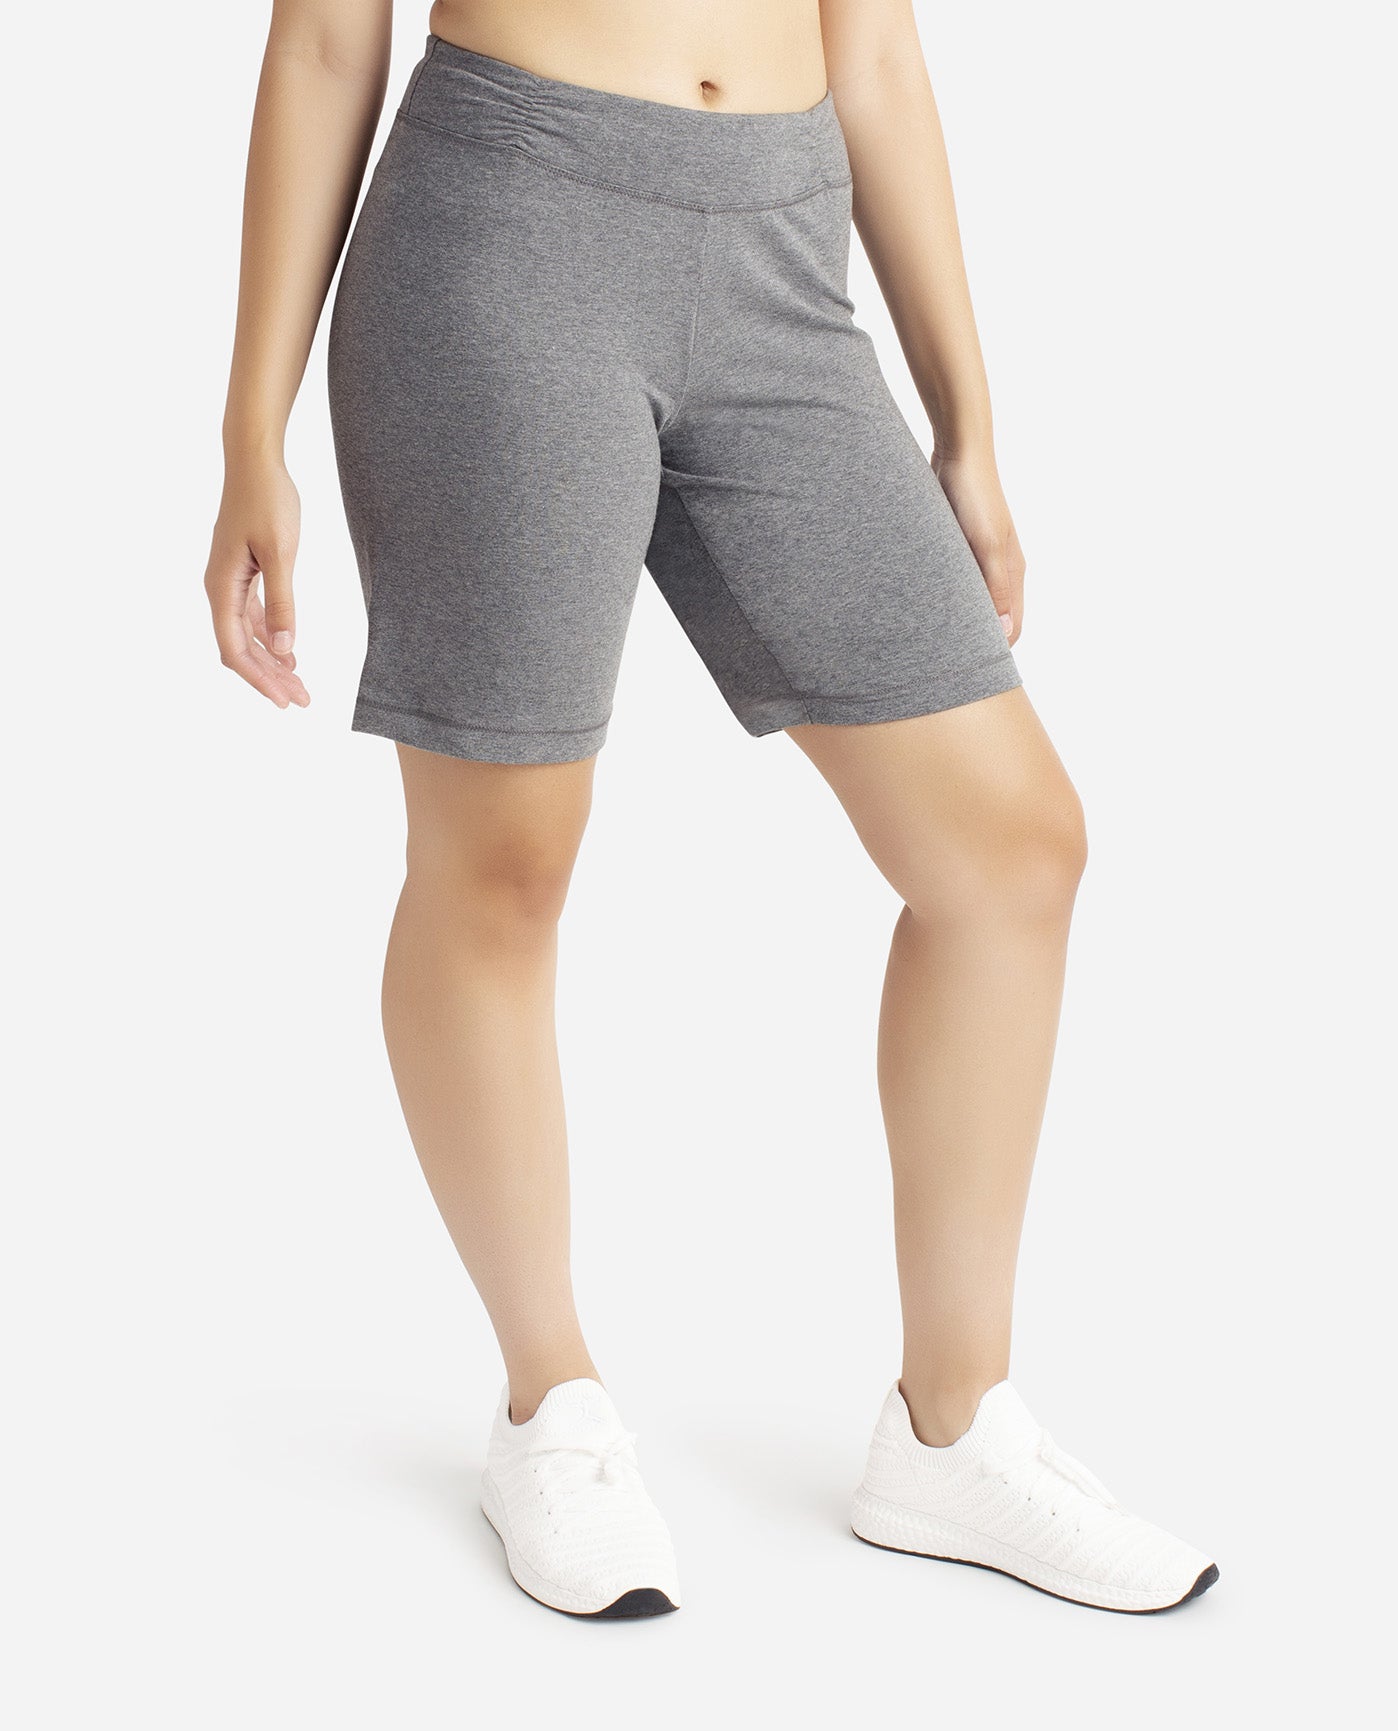 Athletic Shorts By Danskin Now Size: M – Clothes Mentor Newport